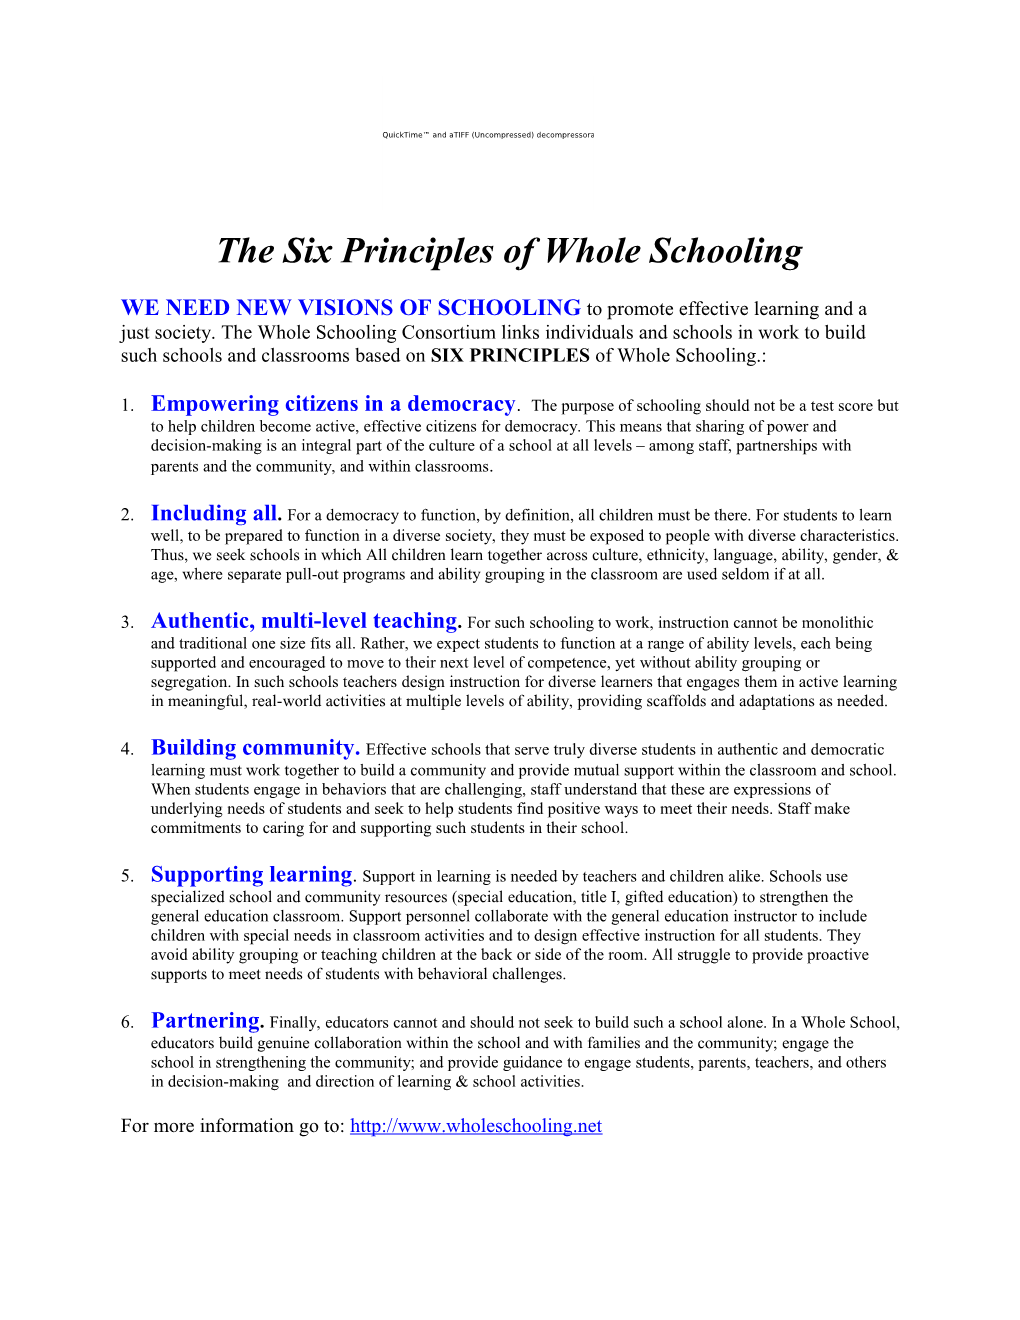 The Six Principles of Whole Schooling